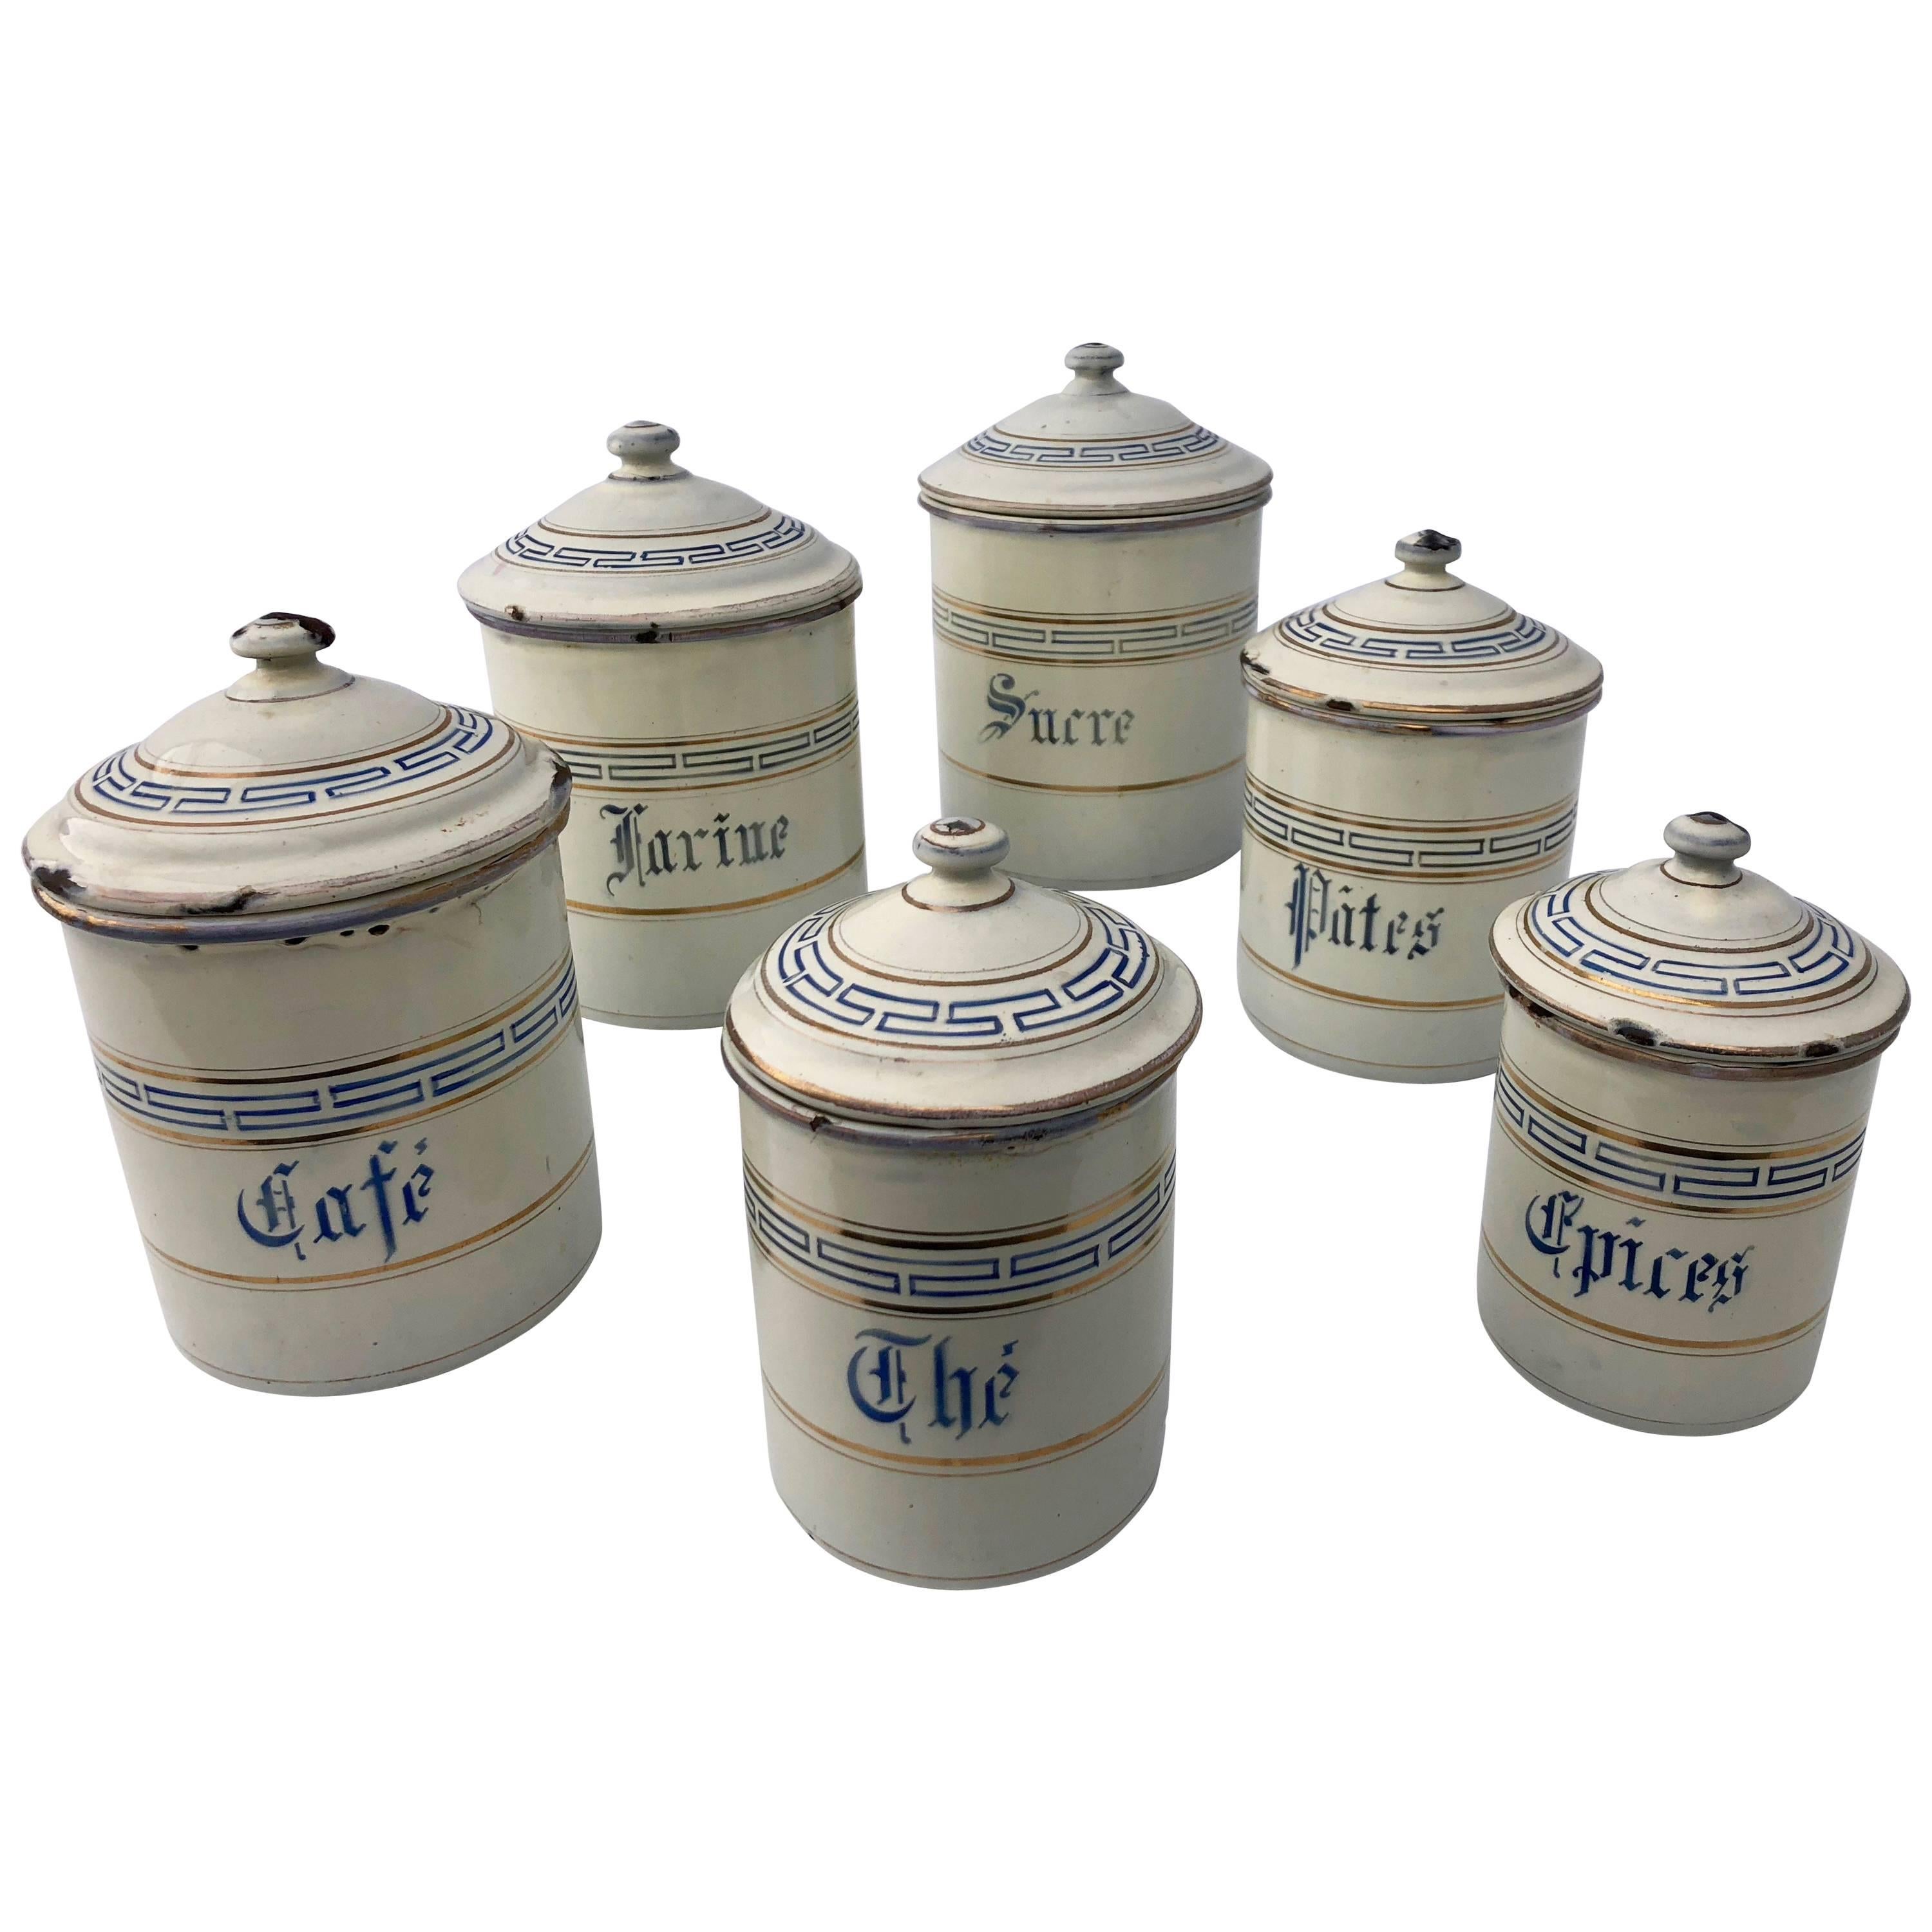 French Enamelware Antique Canister Off-White with Blue and Gold Trim, 12 Pieces For Sale